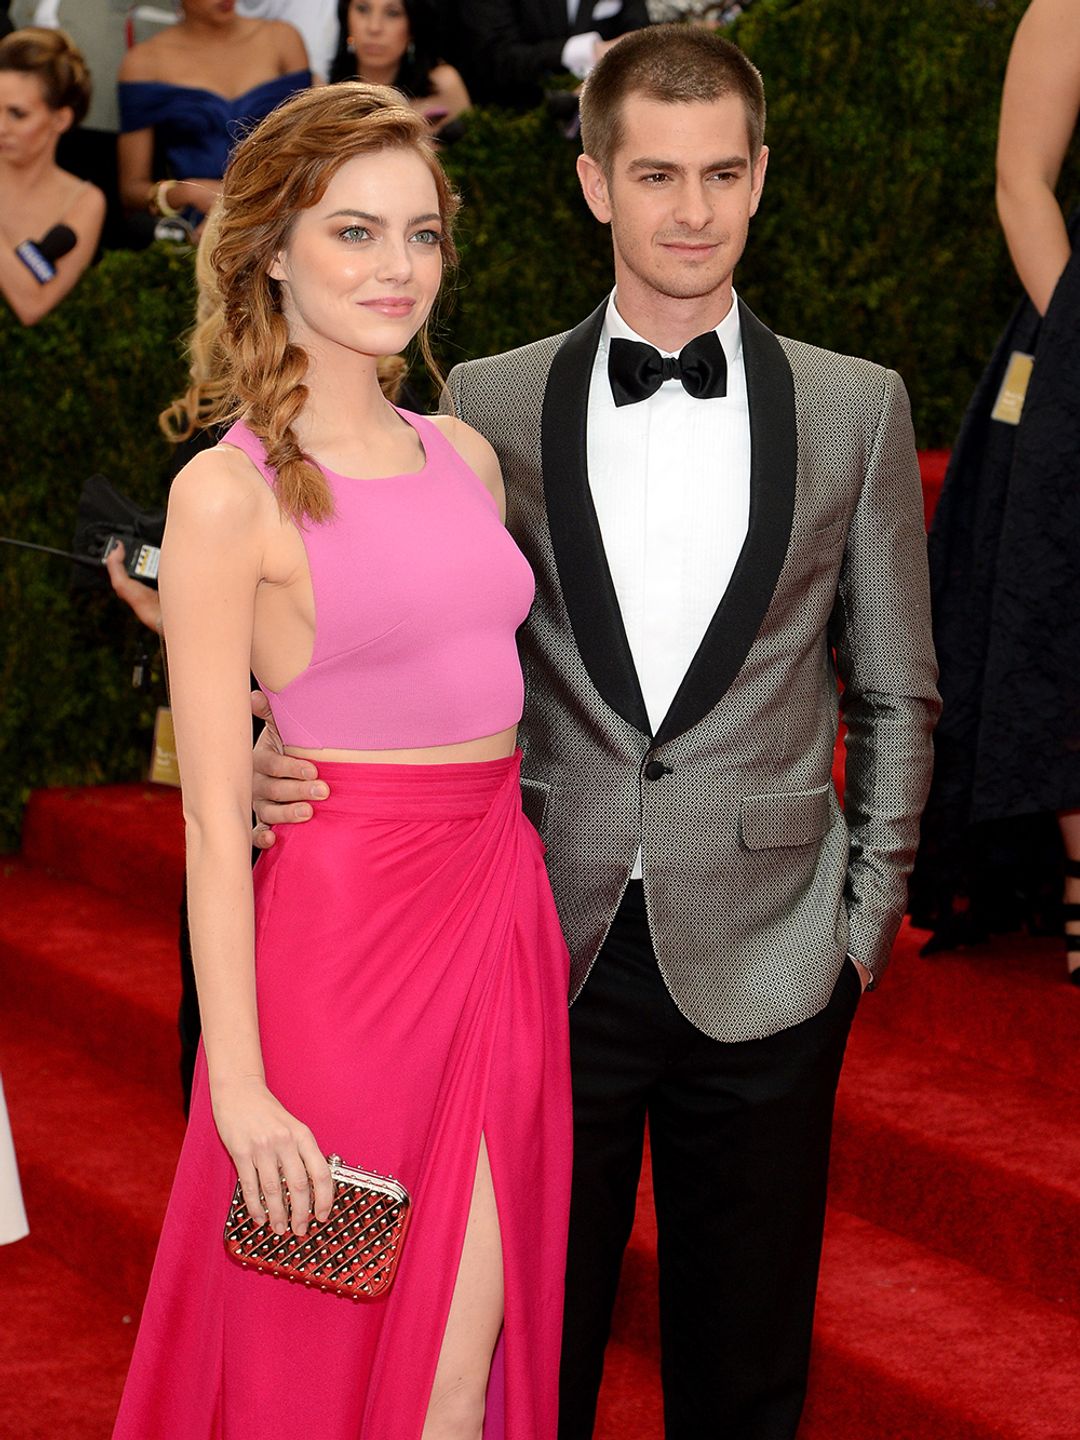 Emma Stone and Andrew Garfield walking the red carpet together